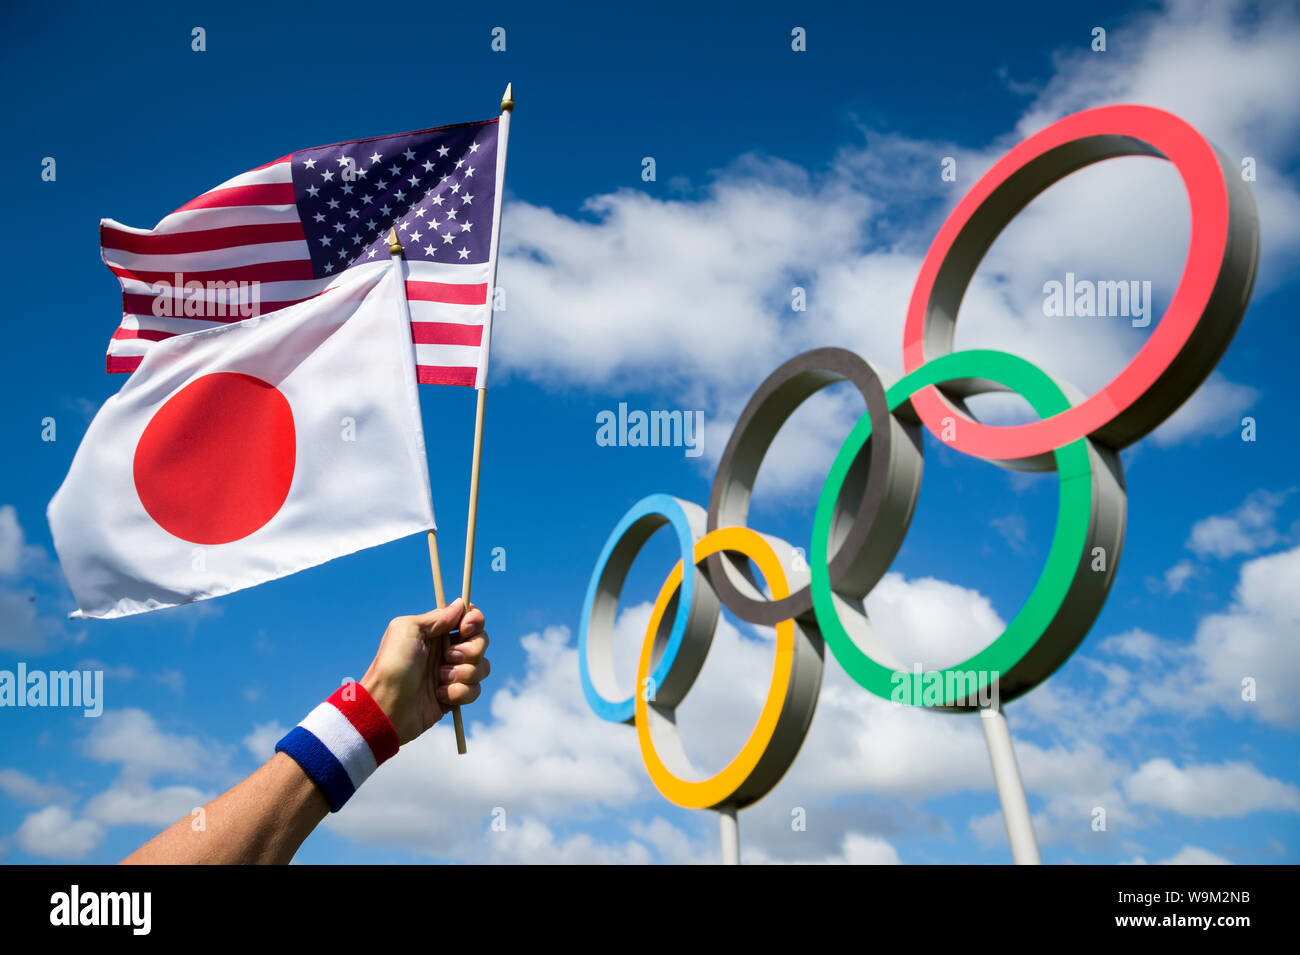 LONDON - APRIL 19, 2019: Hand wearing red white and blue wristband holds Japanese and American flags together in front of Olympic Rings. Stock Photo